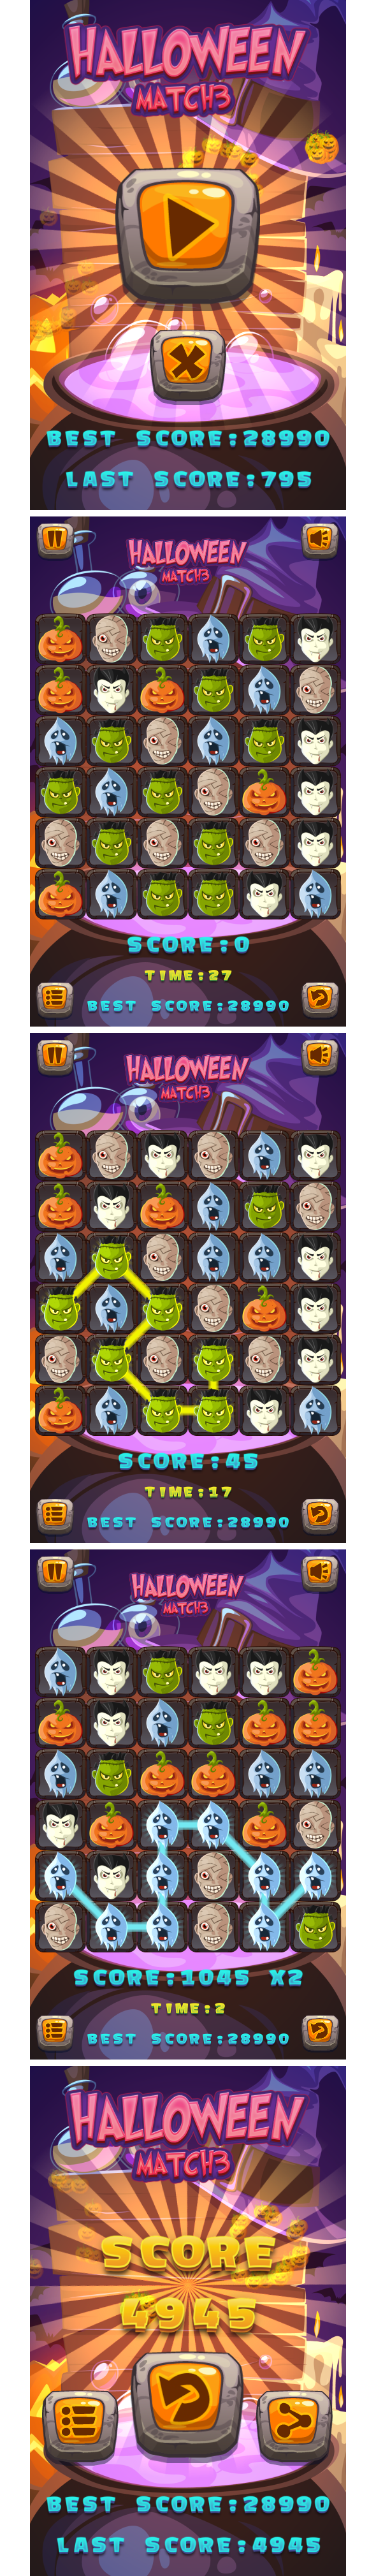 Halloween Match3 - HTML5 Game + Android + AdMob (Construct 3 | Construct 2 | Capx) - 3